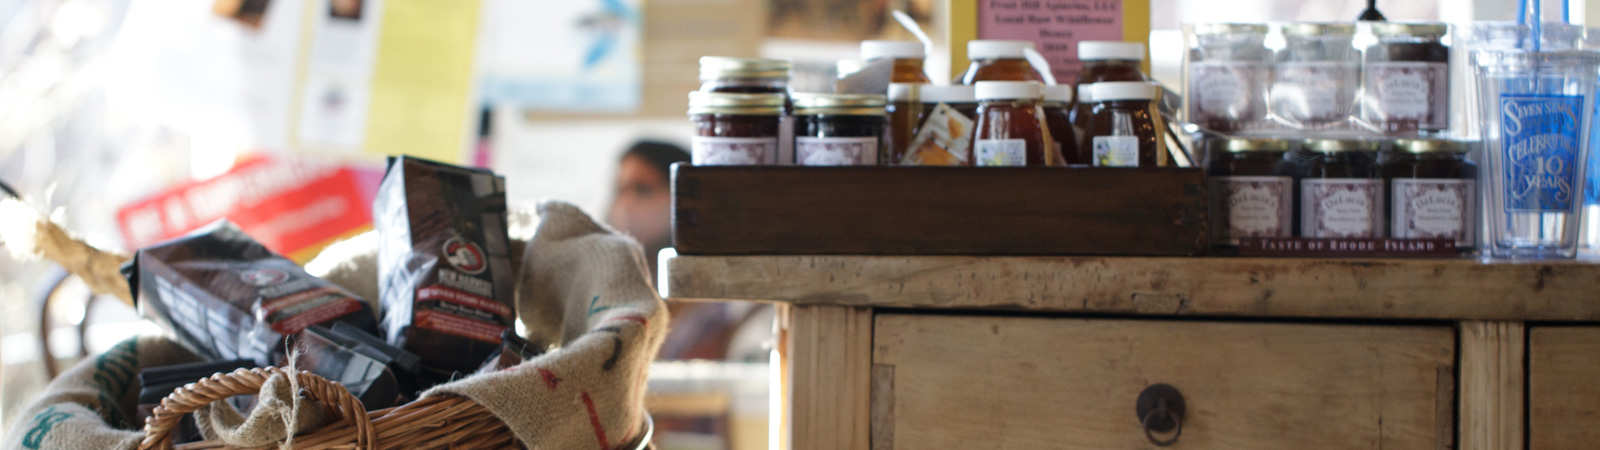 Coffee, jam, honey and other various products in baskets at Seven Stars Bakery.